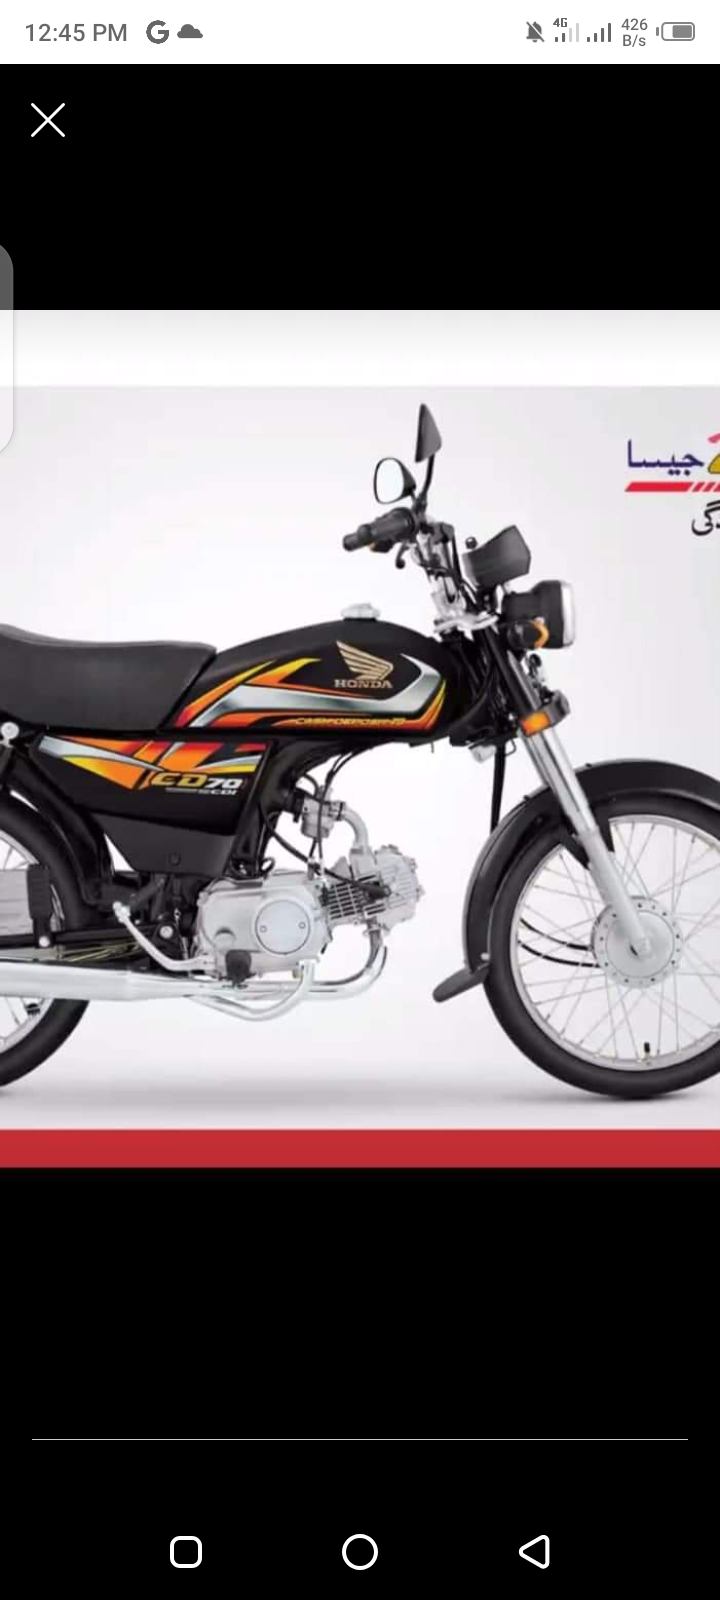 This is new Honda CD70 for you